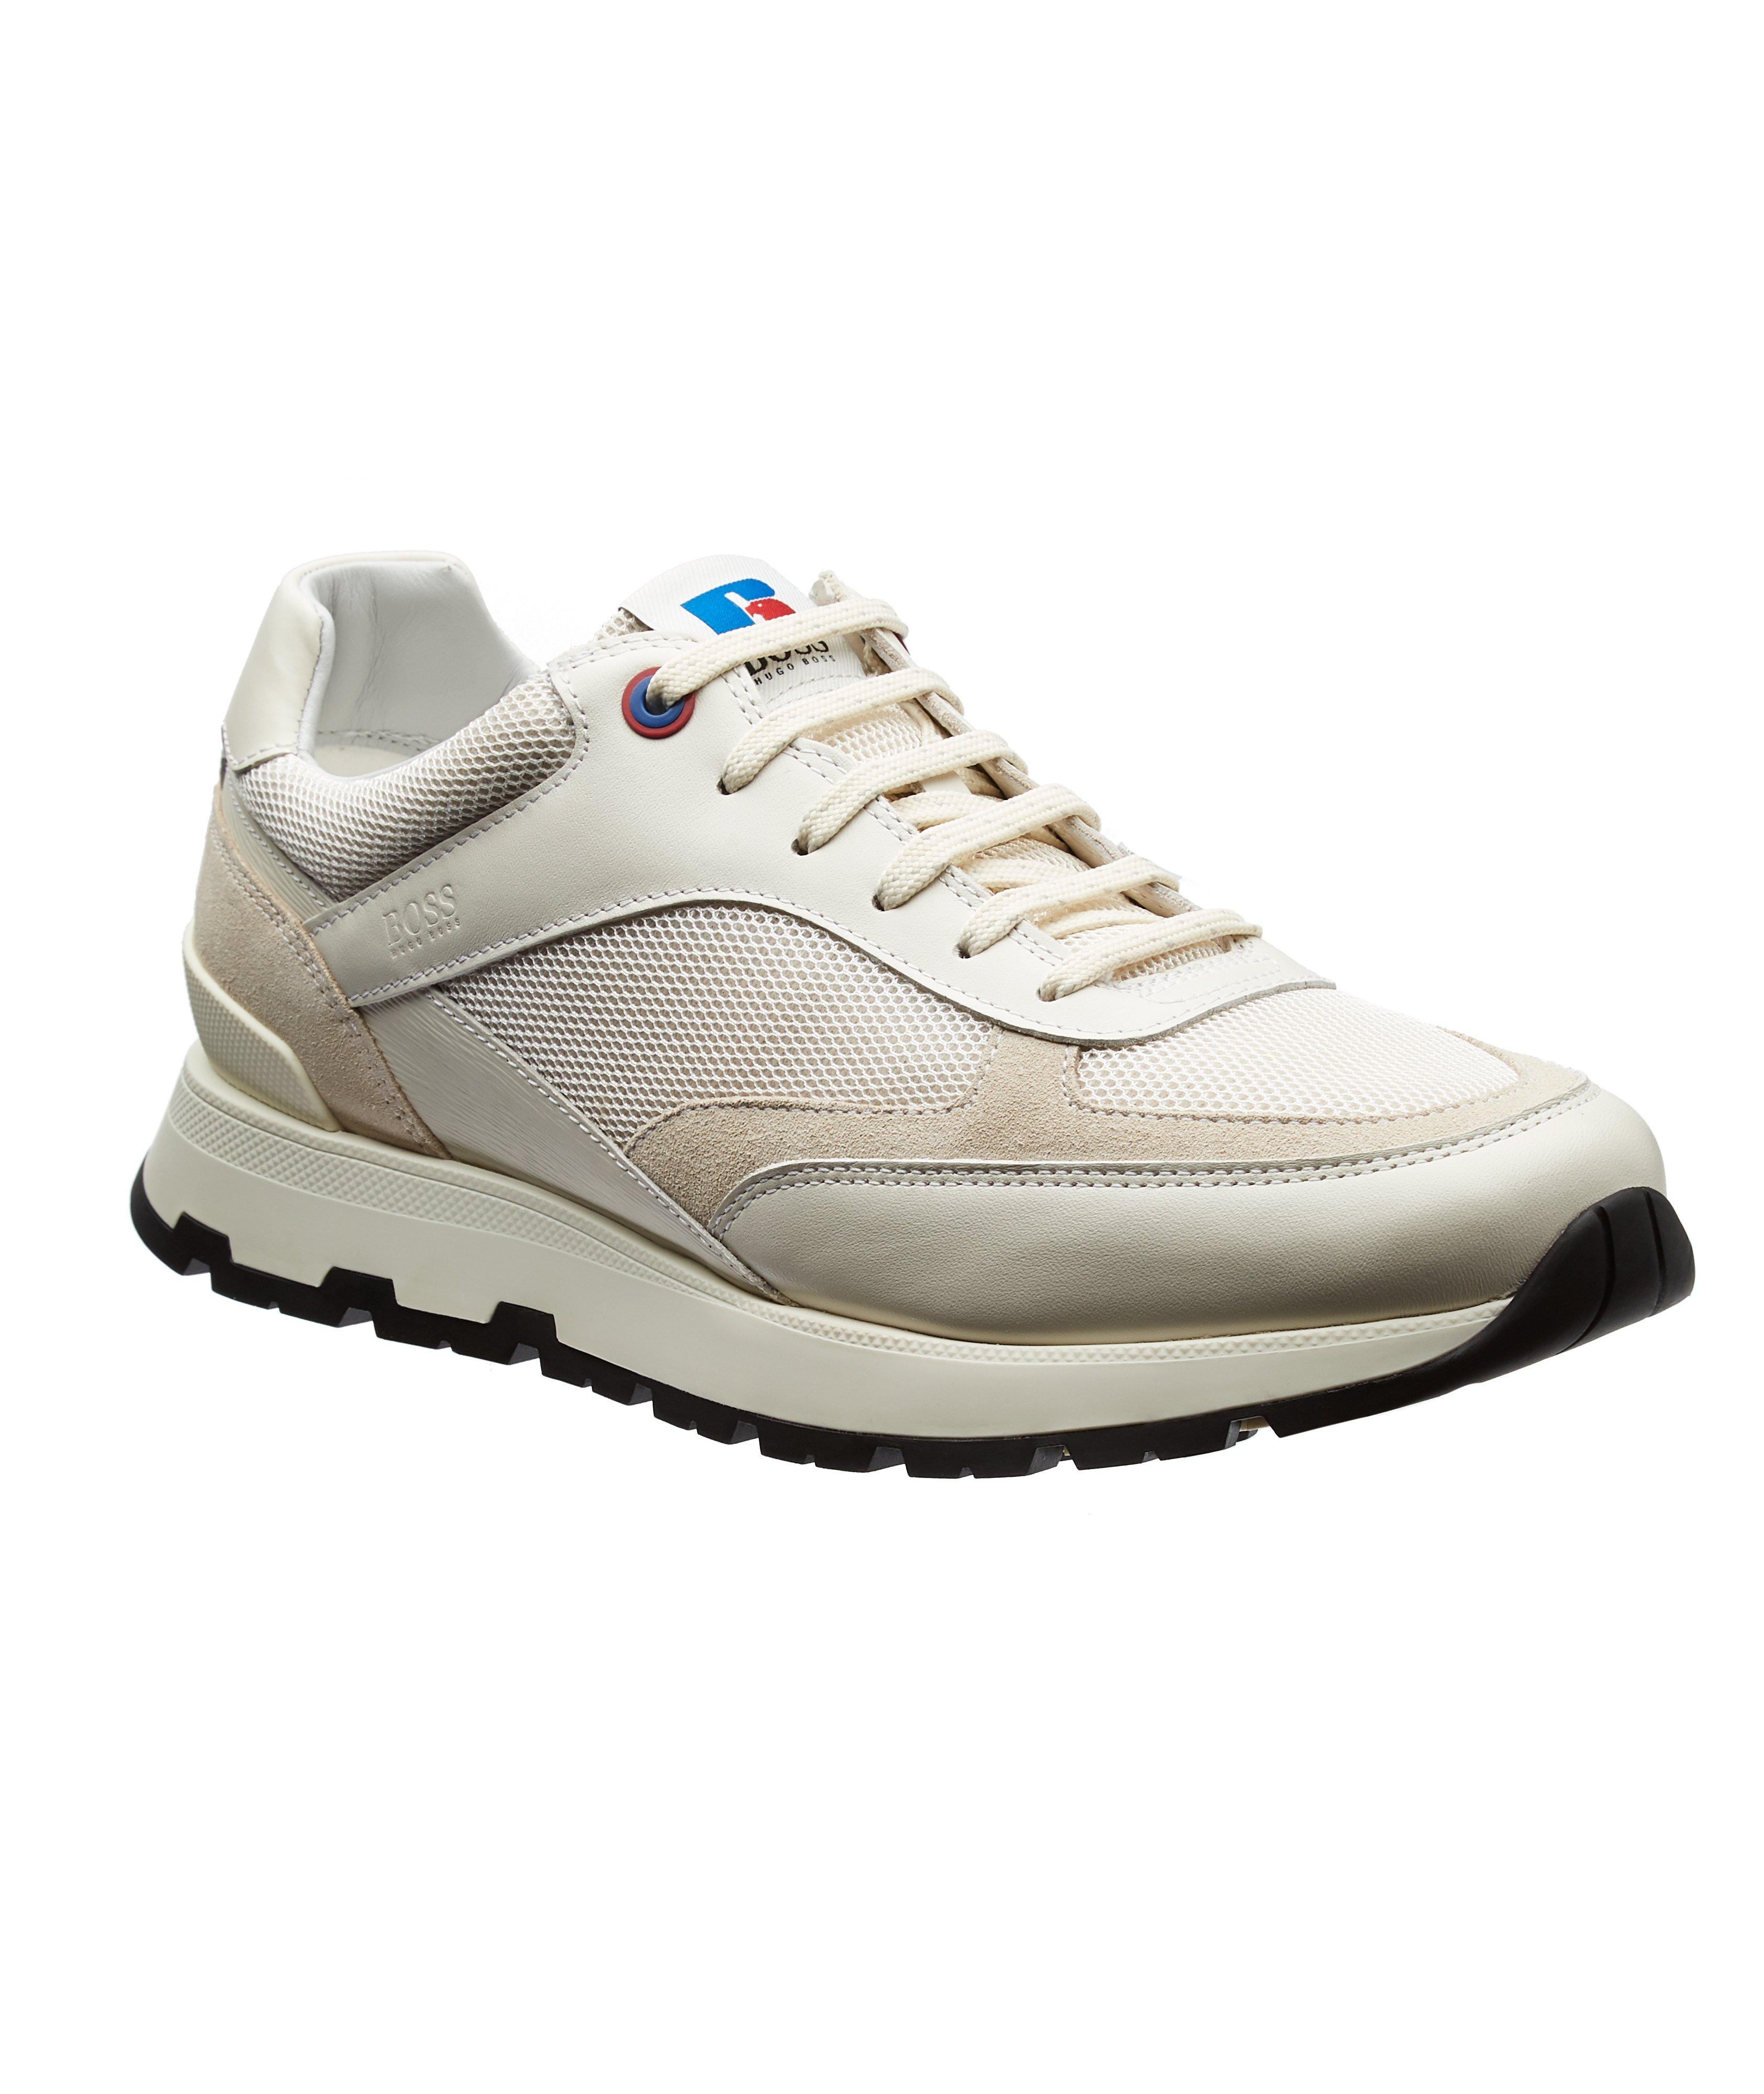 Chaussure sport Arigon, collection Russell Athletic image 0